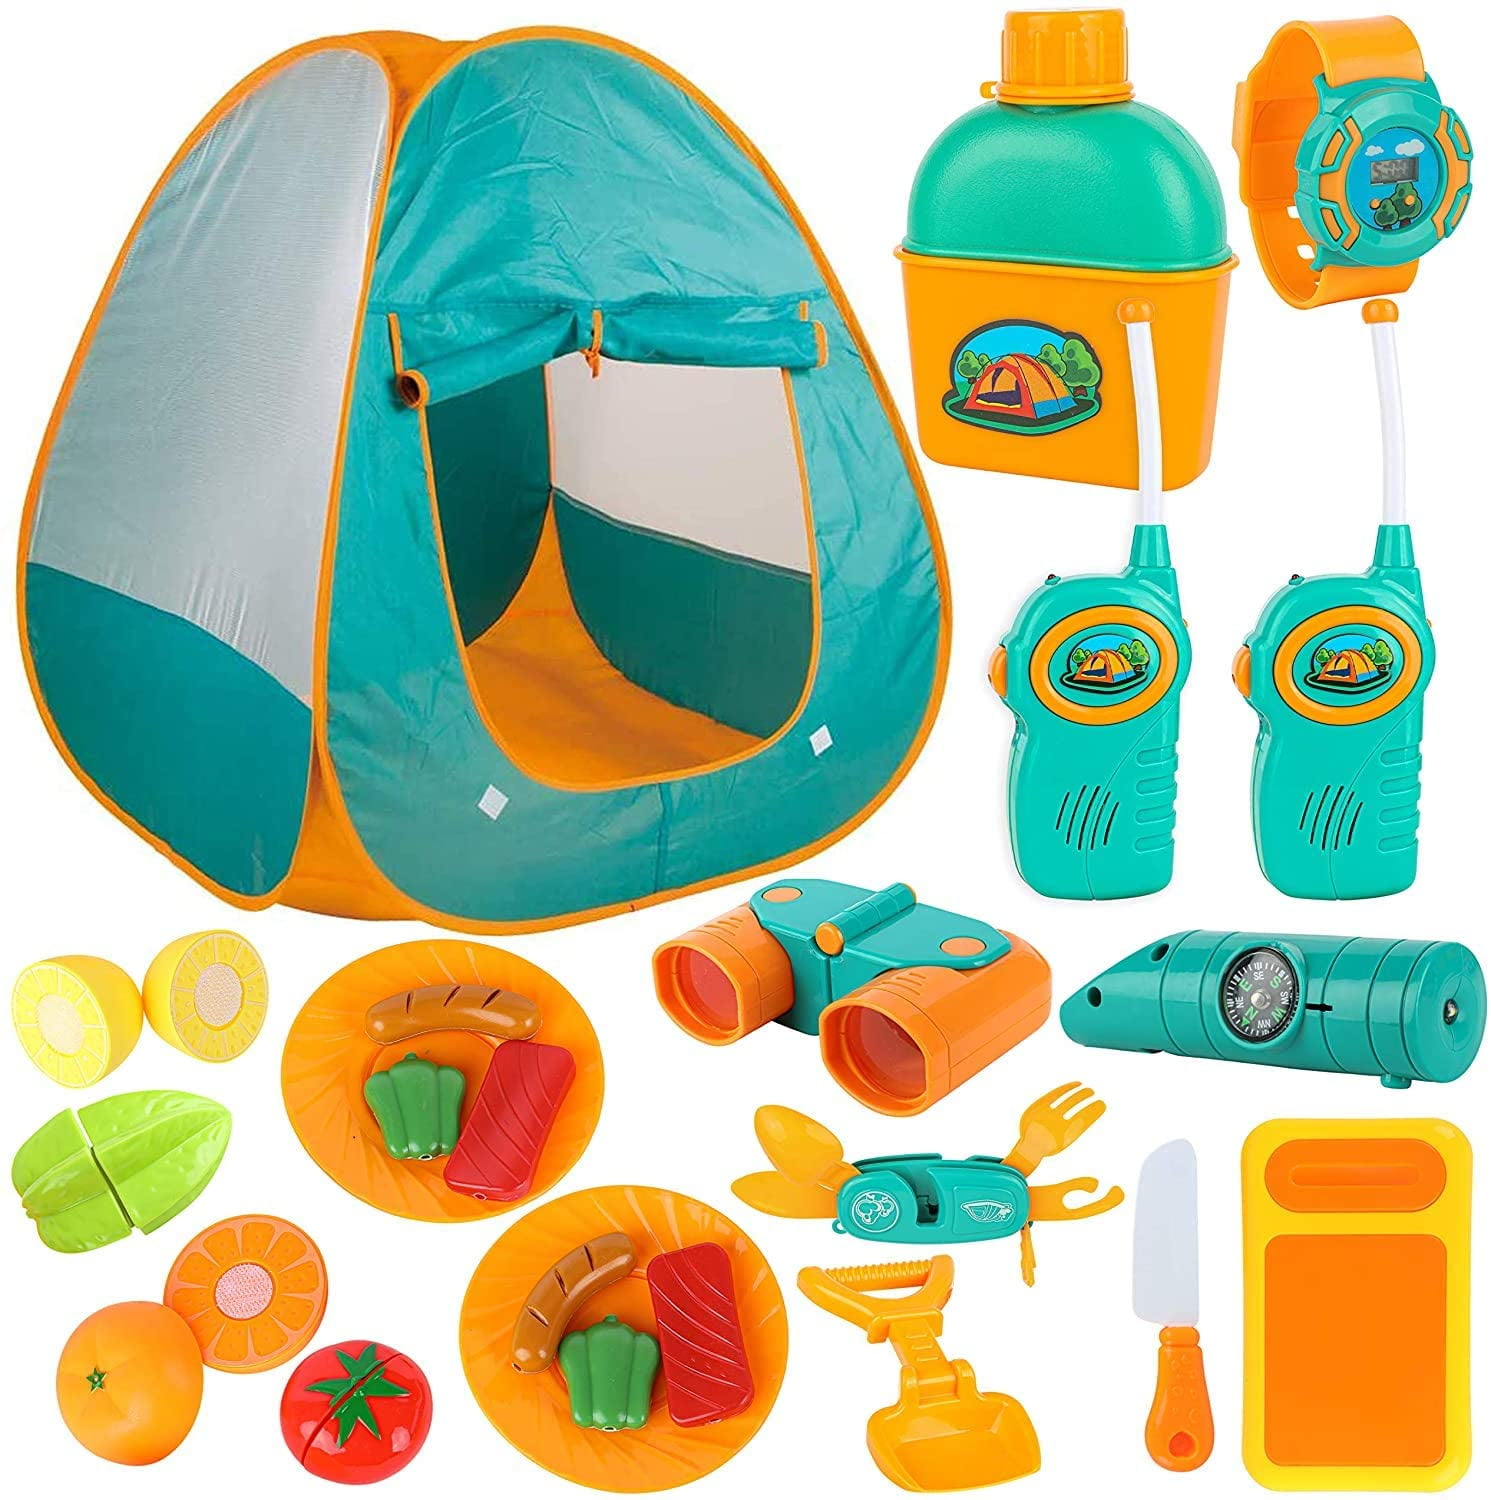 STARGAZING CAMPING VEHICLE - THE TOY STORE